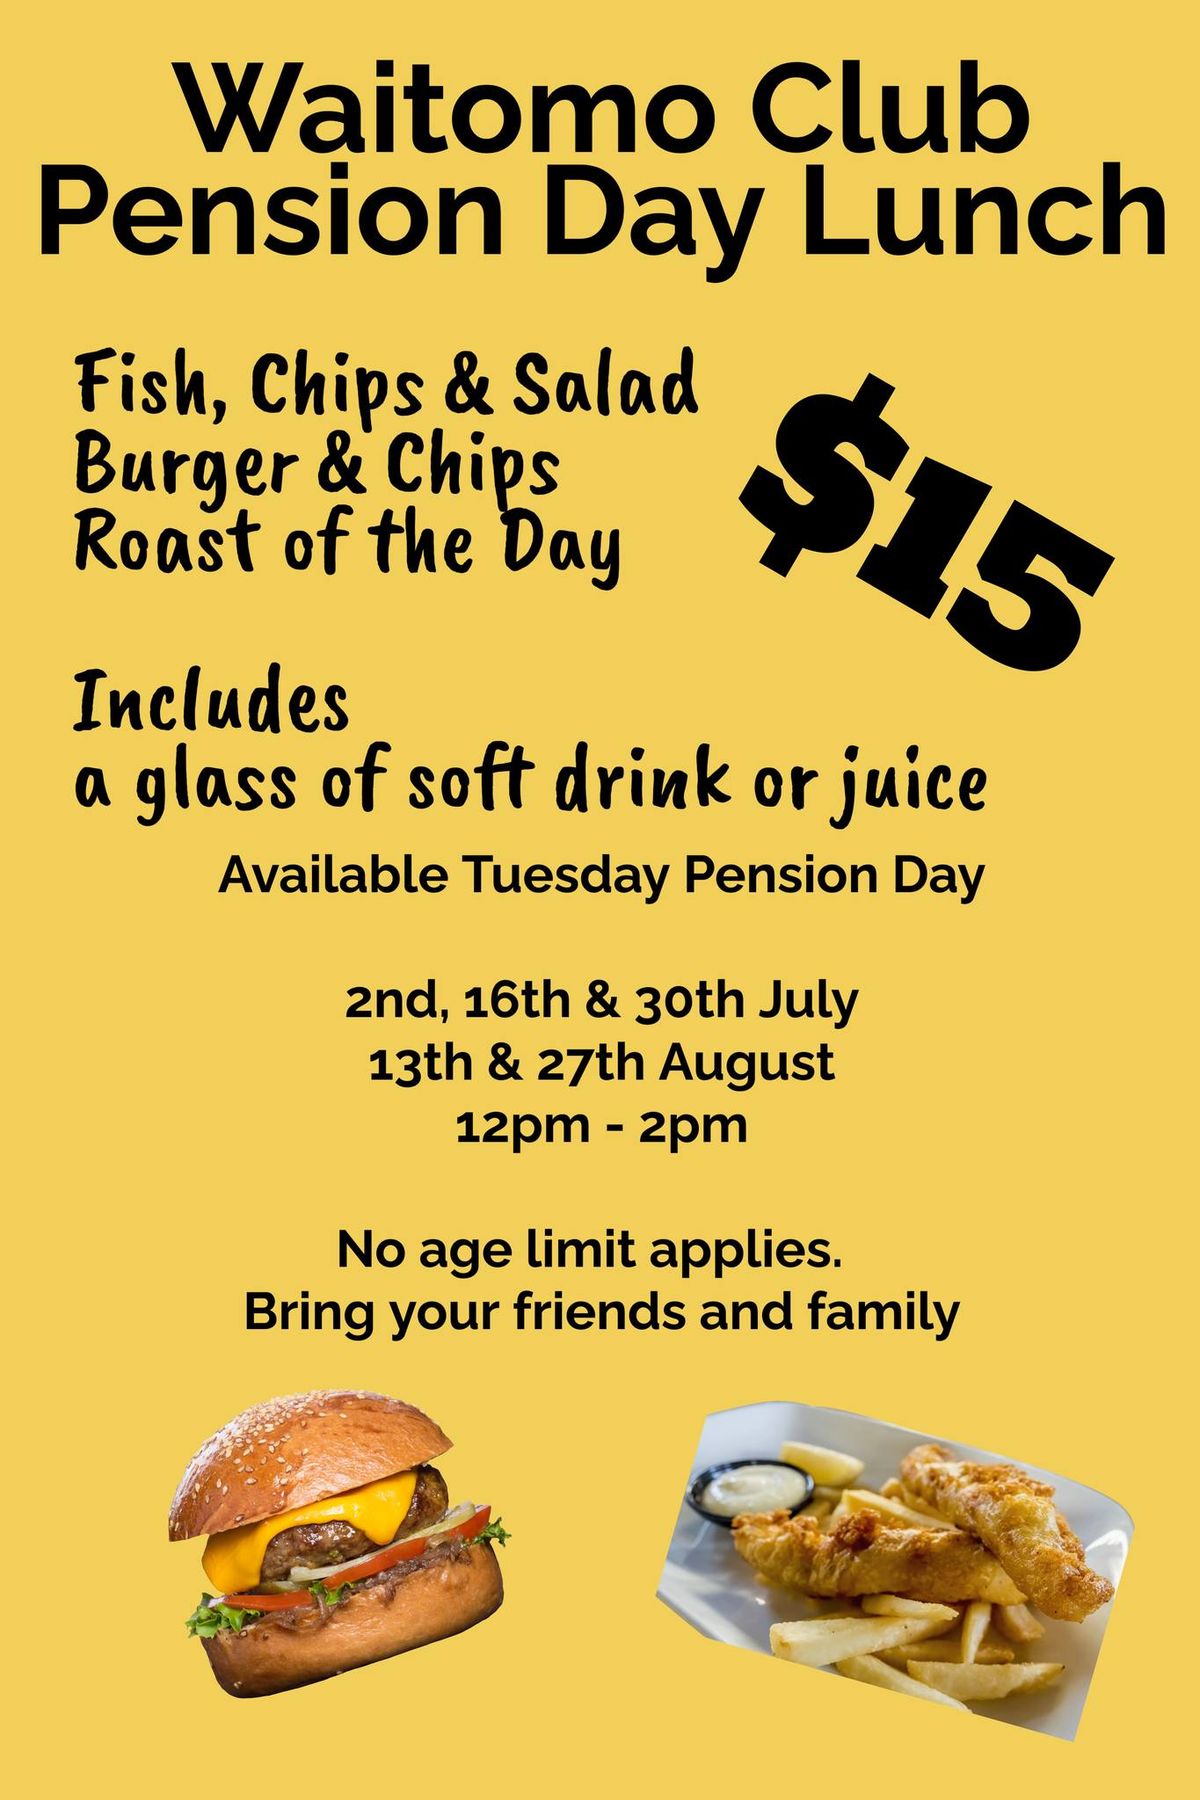 $15 Lunch on Pension Day